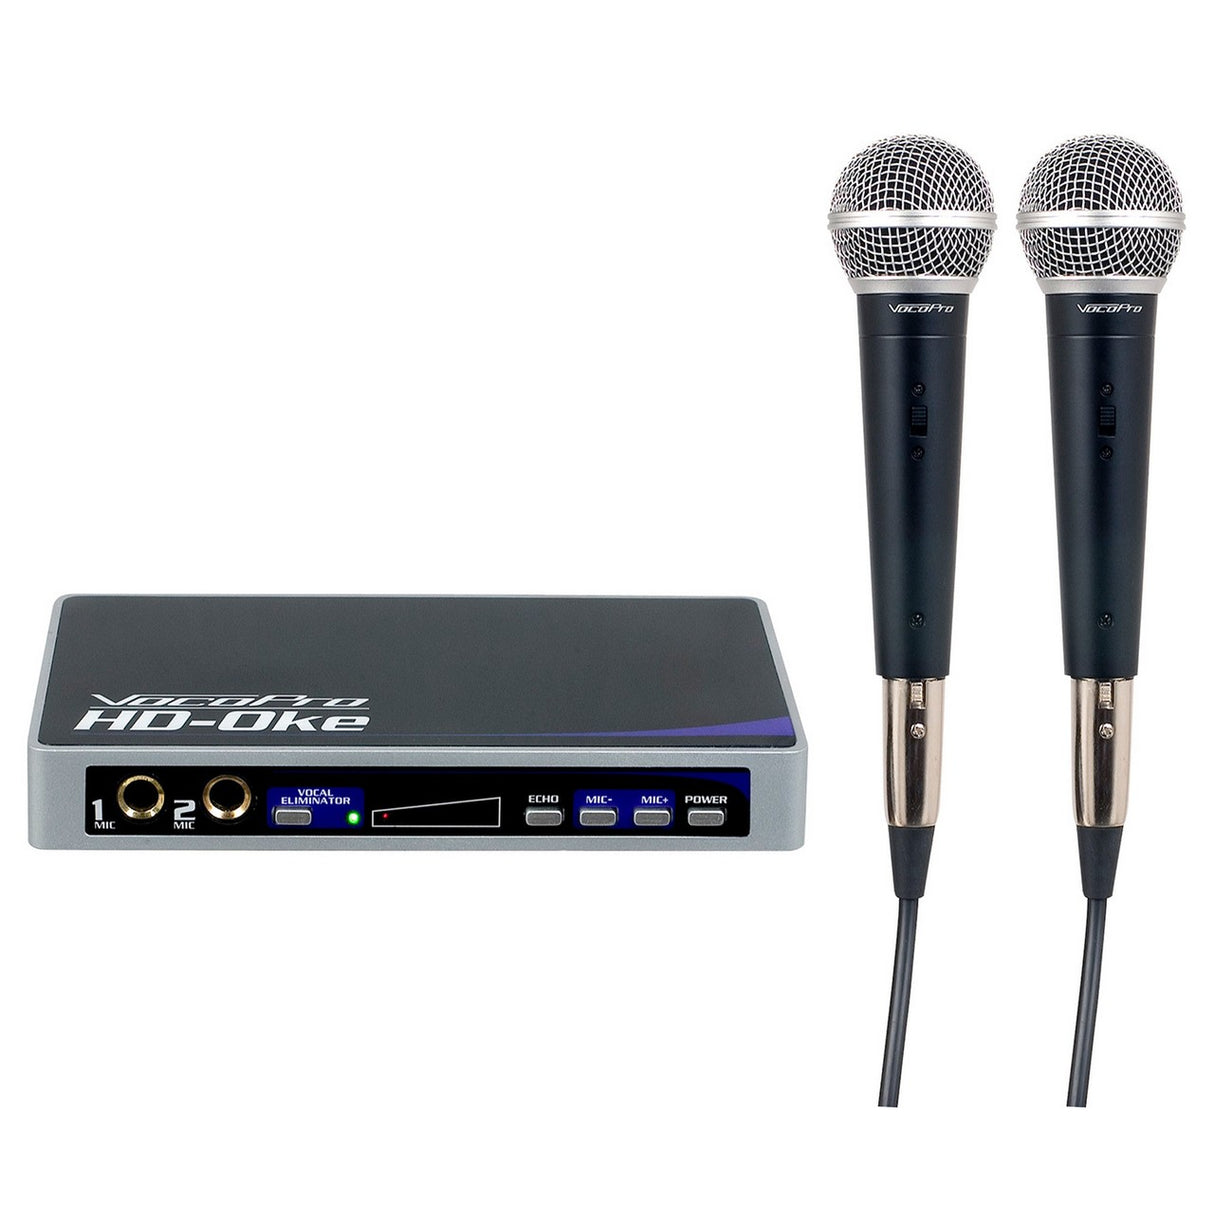 VocoPro HD Oke | Karaoke Add-One for Soundbars and Home Theater Systems with HDMI Connections